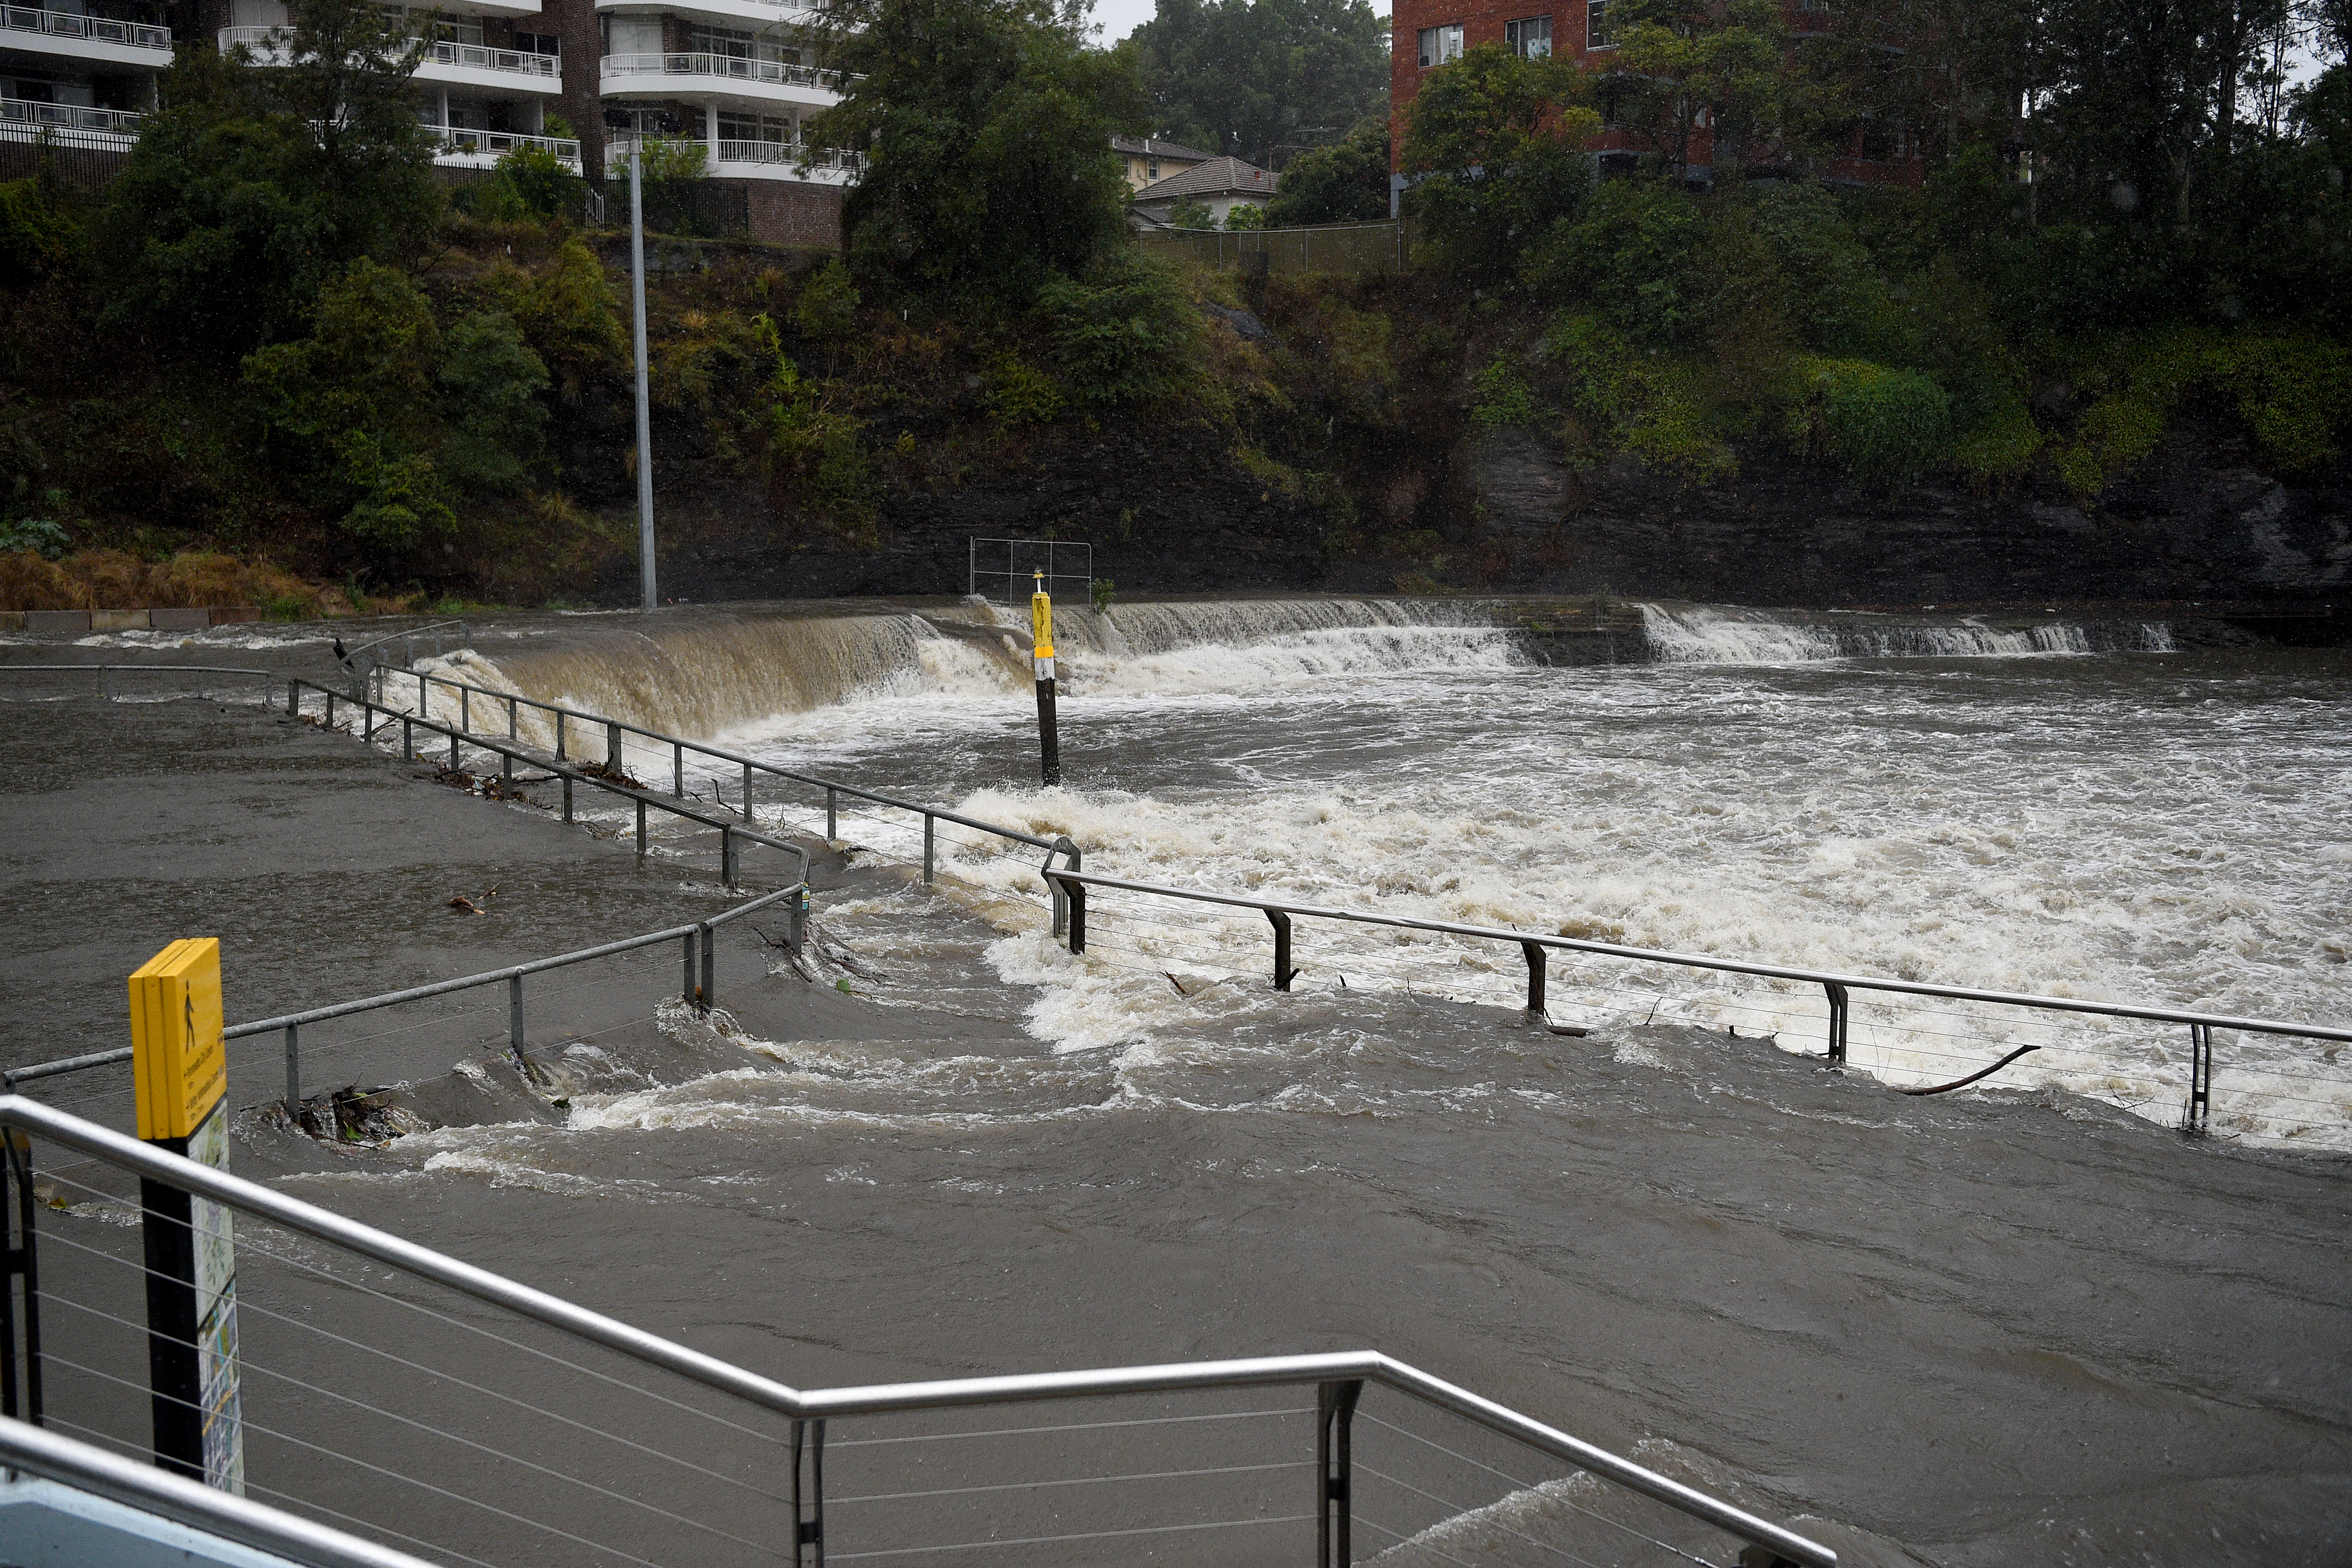 Heavy rain is drenching large swathes of eastern NSW, forcing road closures and sparking concerns about the risk of flash flooding.